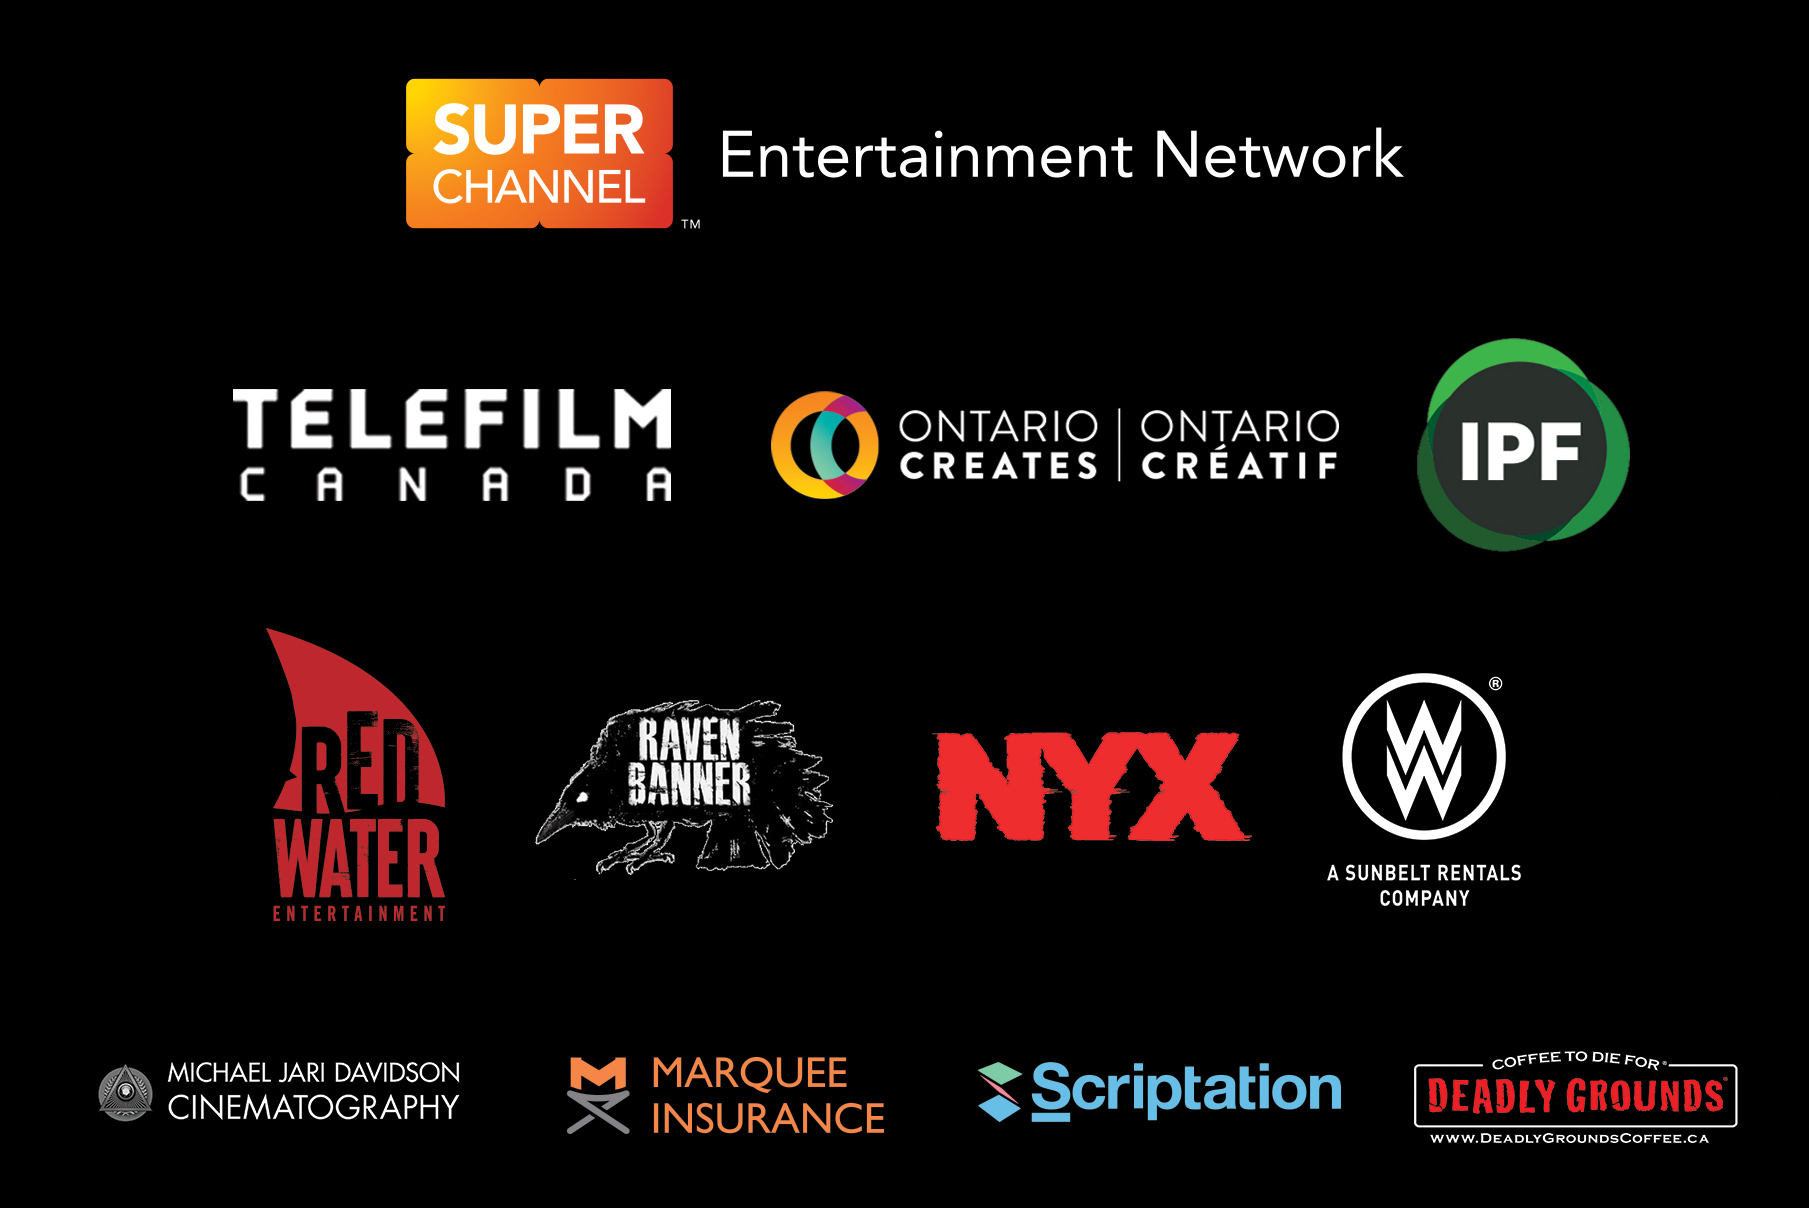 Image of all of the festival sponsor’s logos; Super Channel, Telefilm Canada, Ontario Creates, IPF, Raven Banner, Red Water, Marquee Insurance, William F. White International, Michael Jari Davidson, Deadly Grounds Coffee, Scriptation, NYX